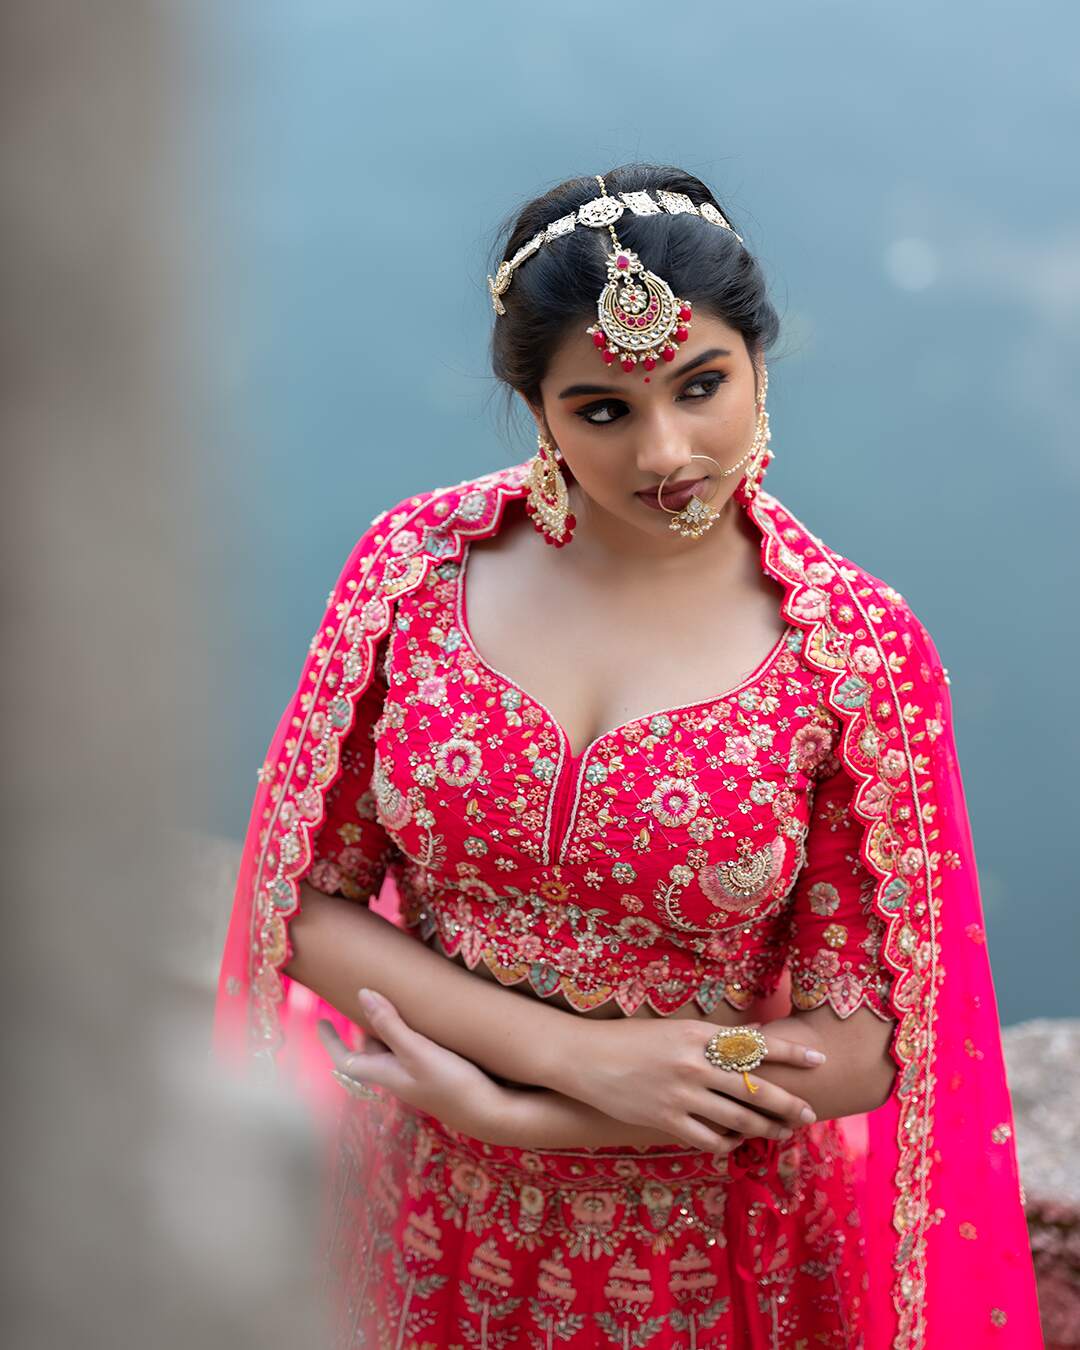 Is Powder Pink The New Red In Bridal Lehengas In 2021-22? | Latest bridal  lehenga, Pink bridal lehenga, Bridal lehenga images